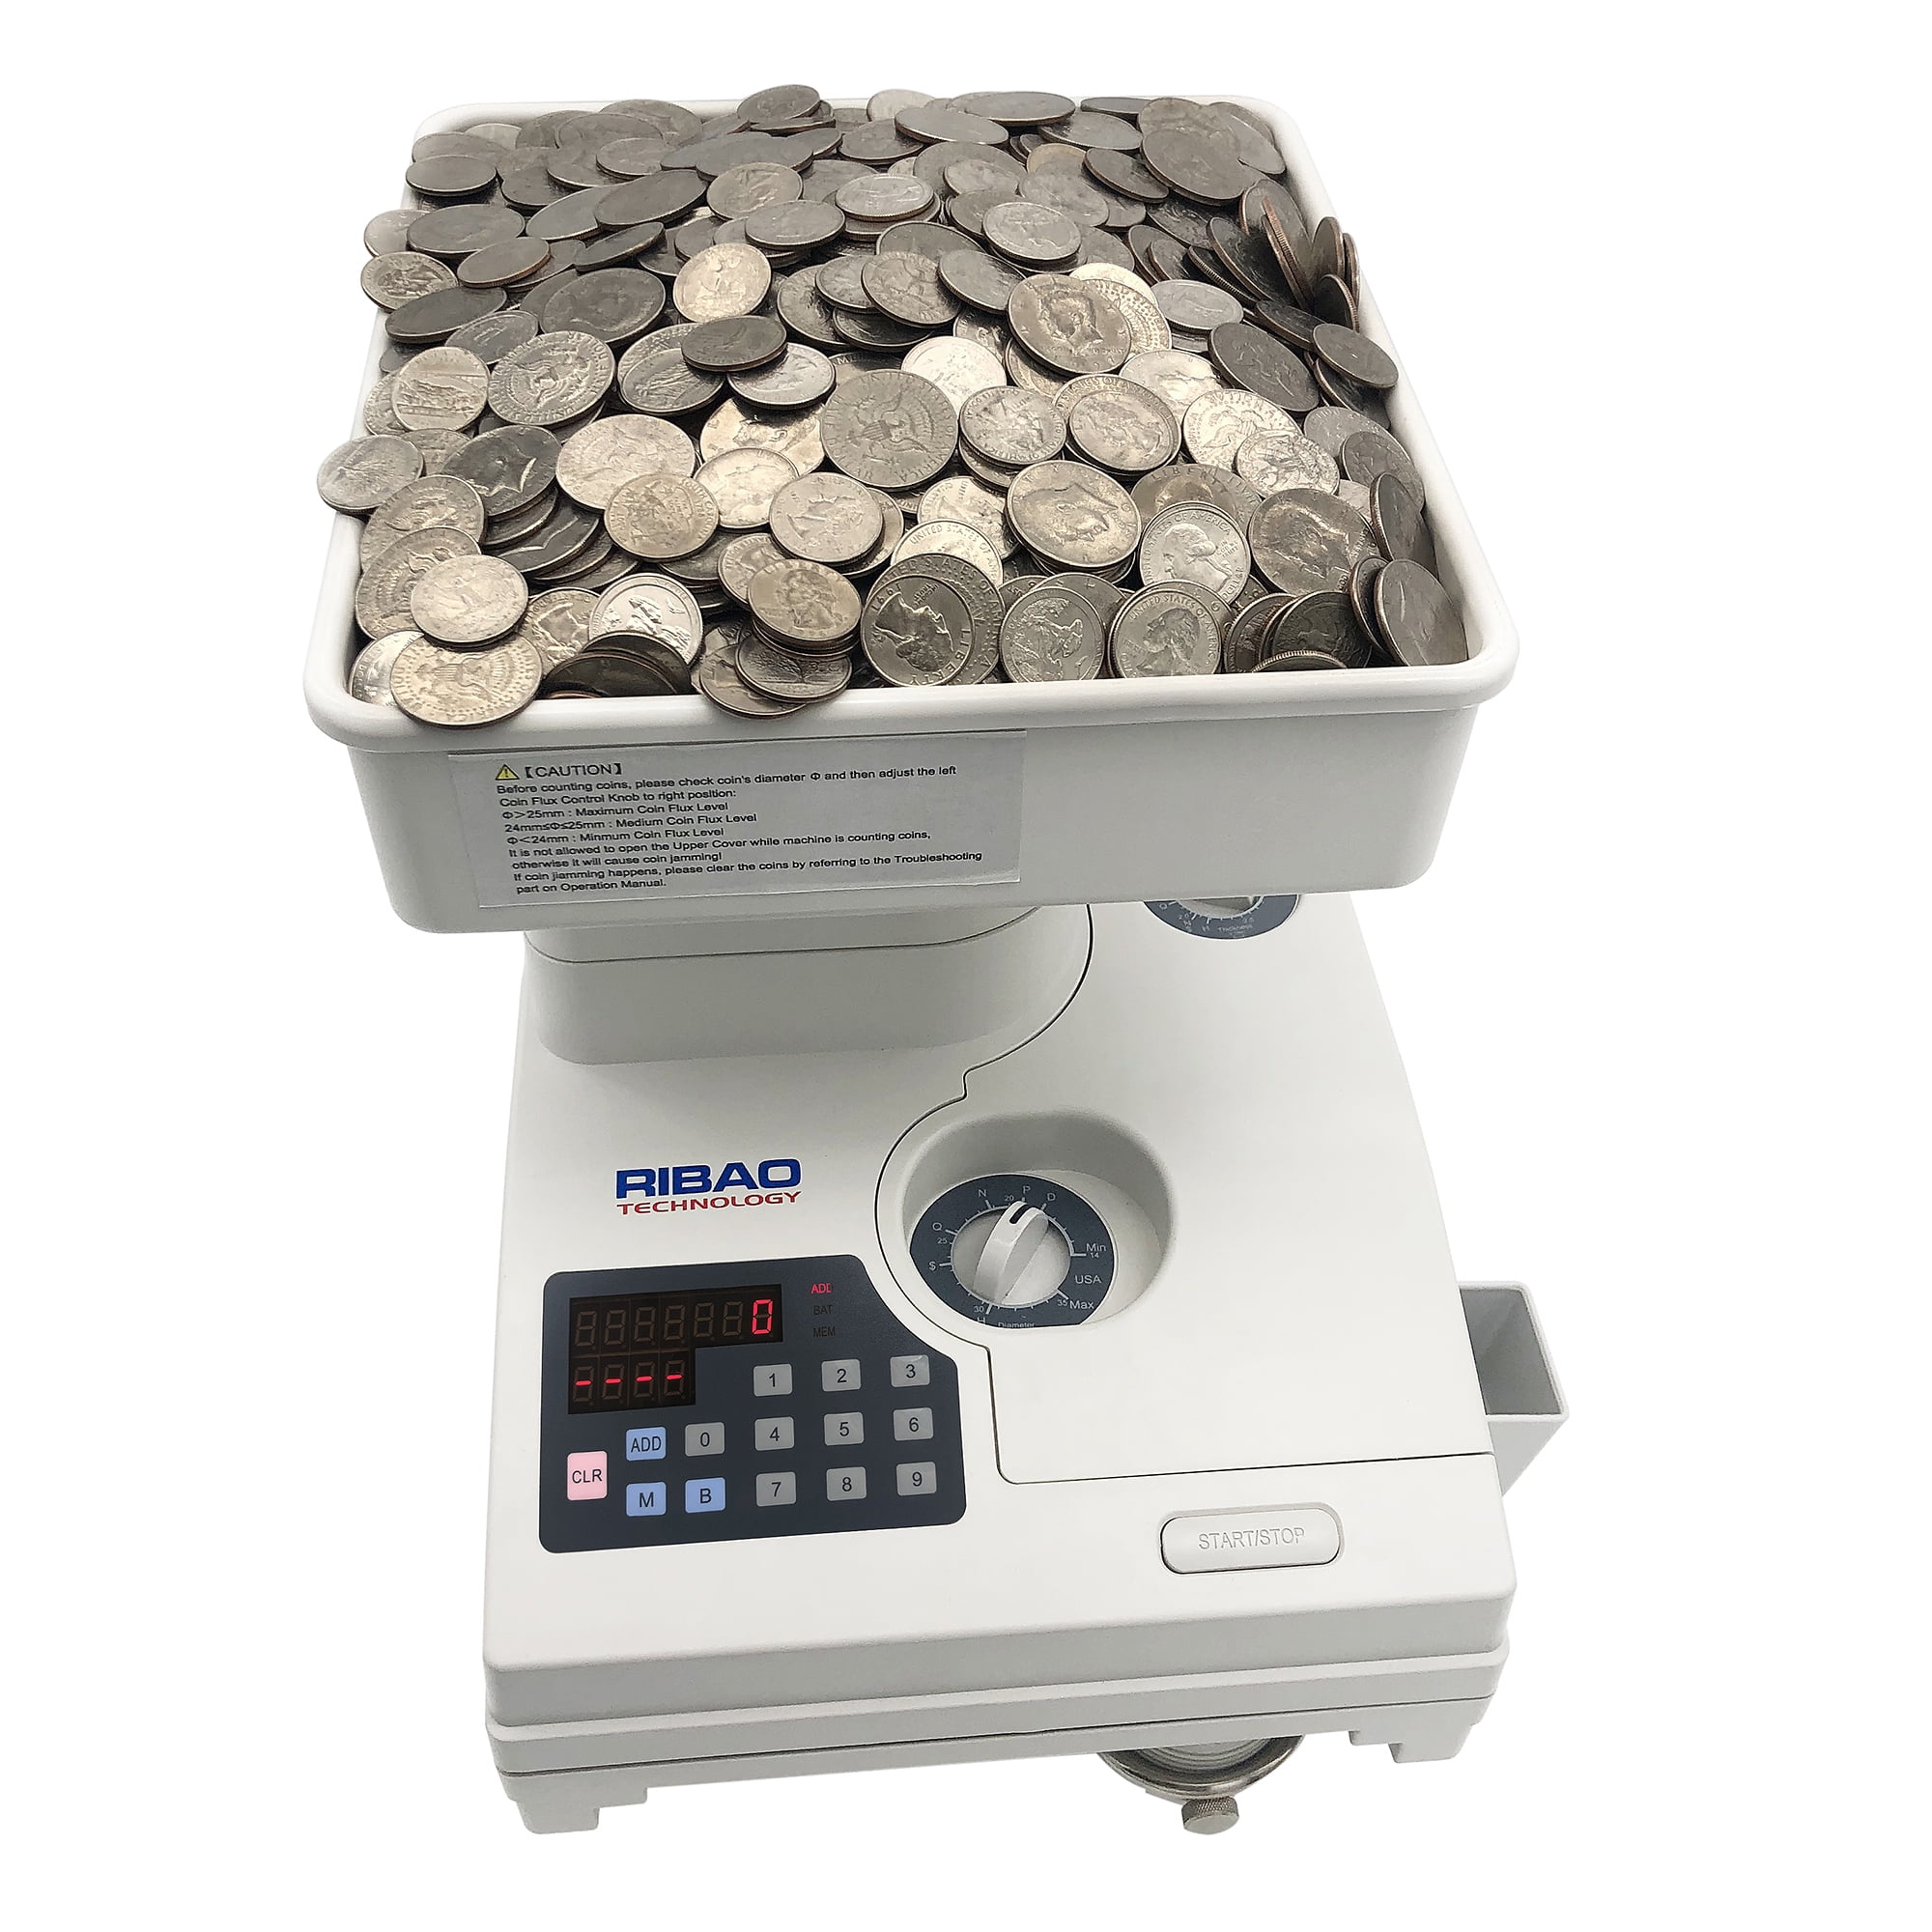 Cassida C200 Commercial Electronic Coin Counter Sorter with 3 Year Ext Warranty! 